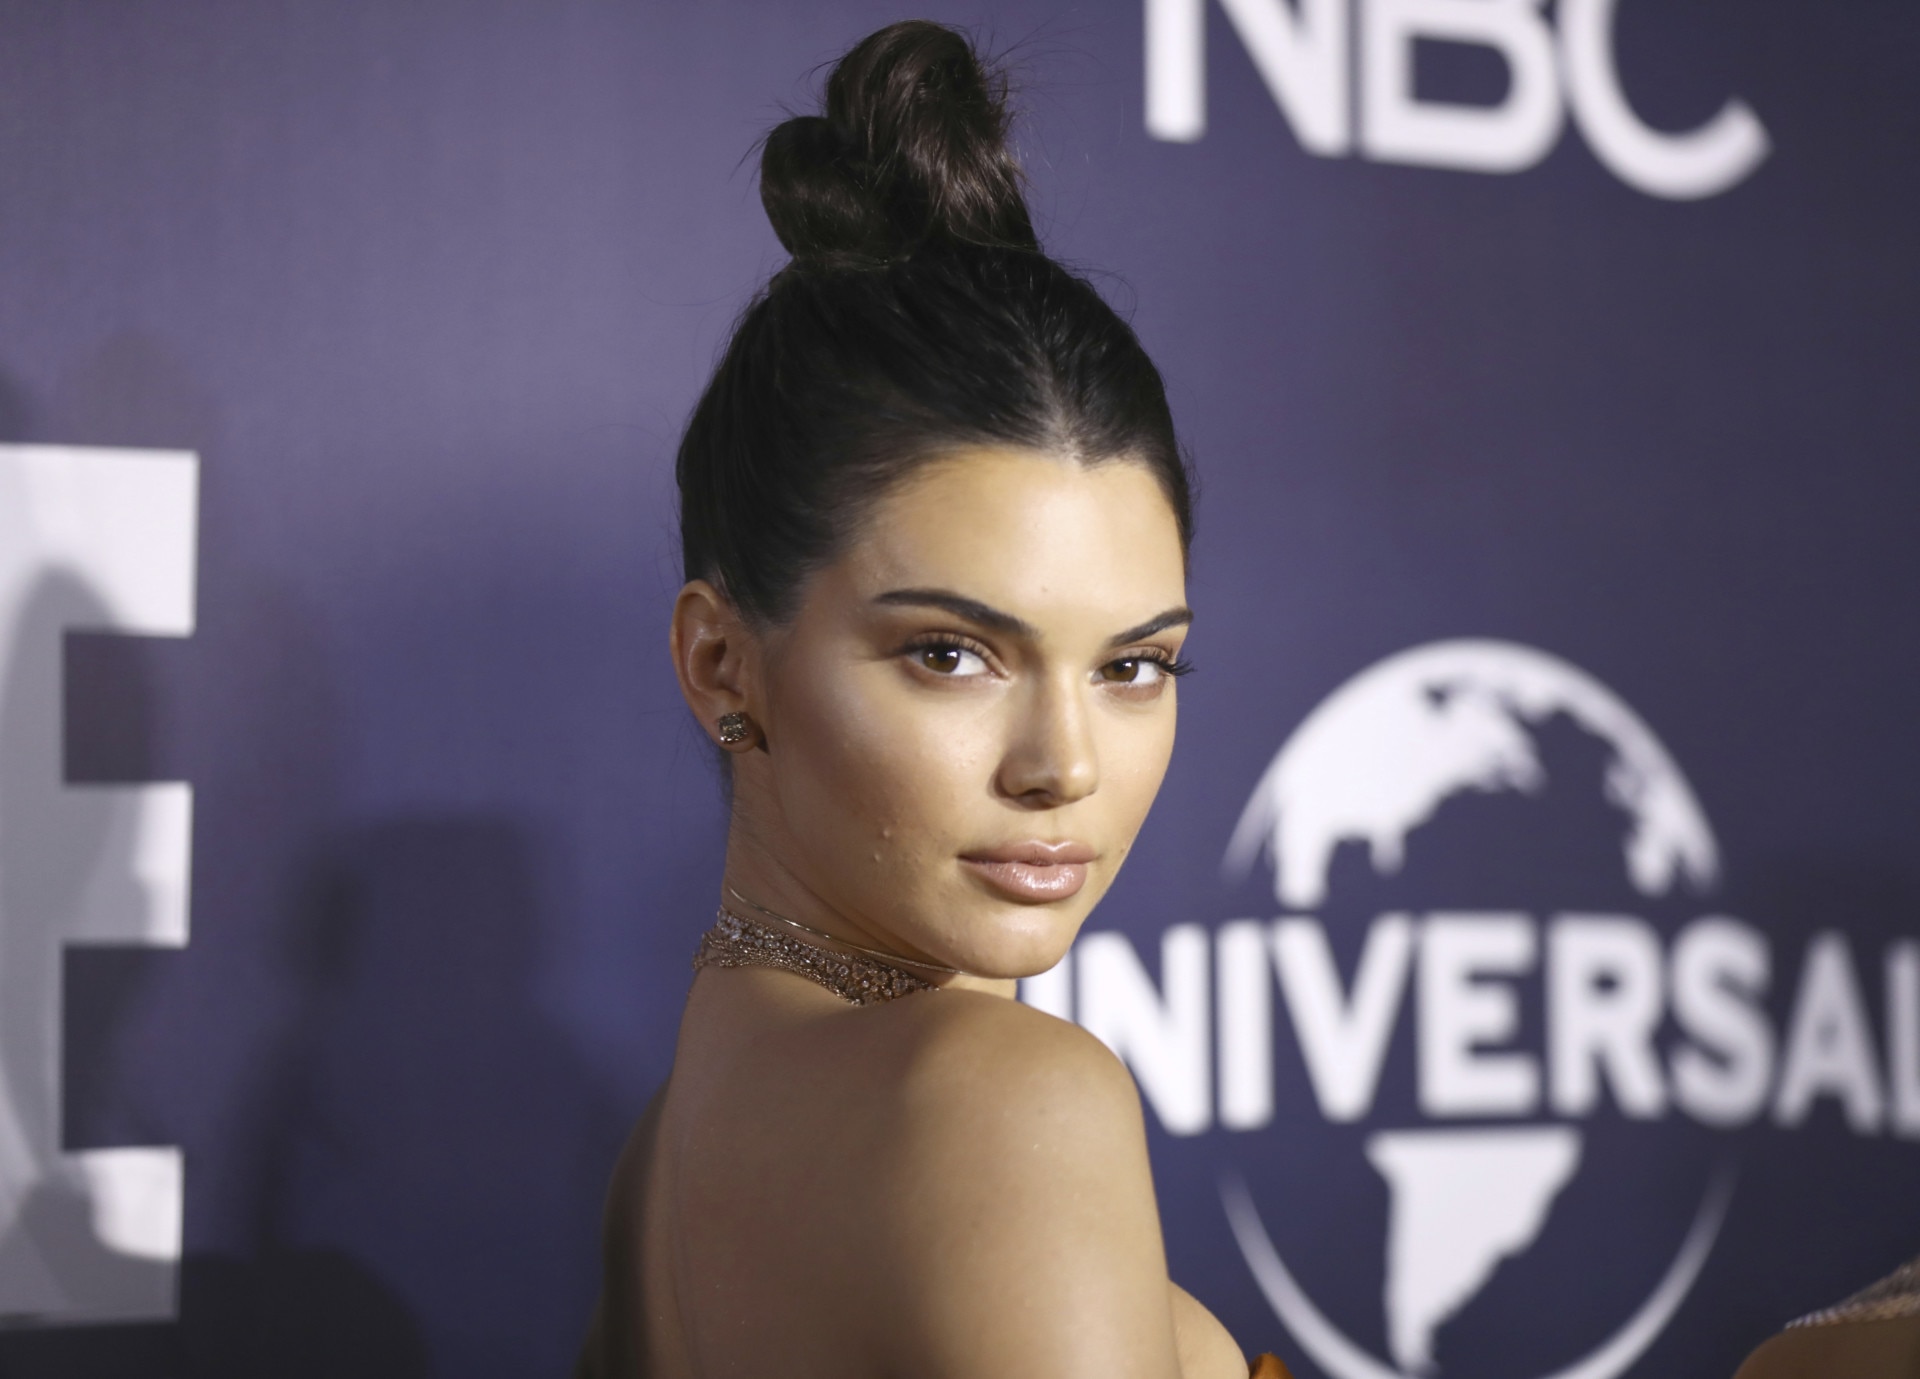 Did Kendall Jenner 'Go Too Far' With Plastic Surgery? A Surgeon